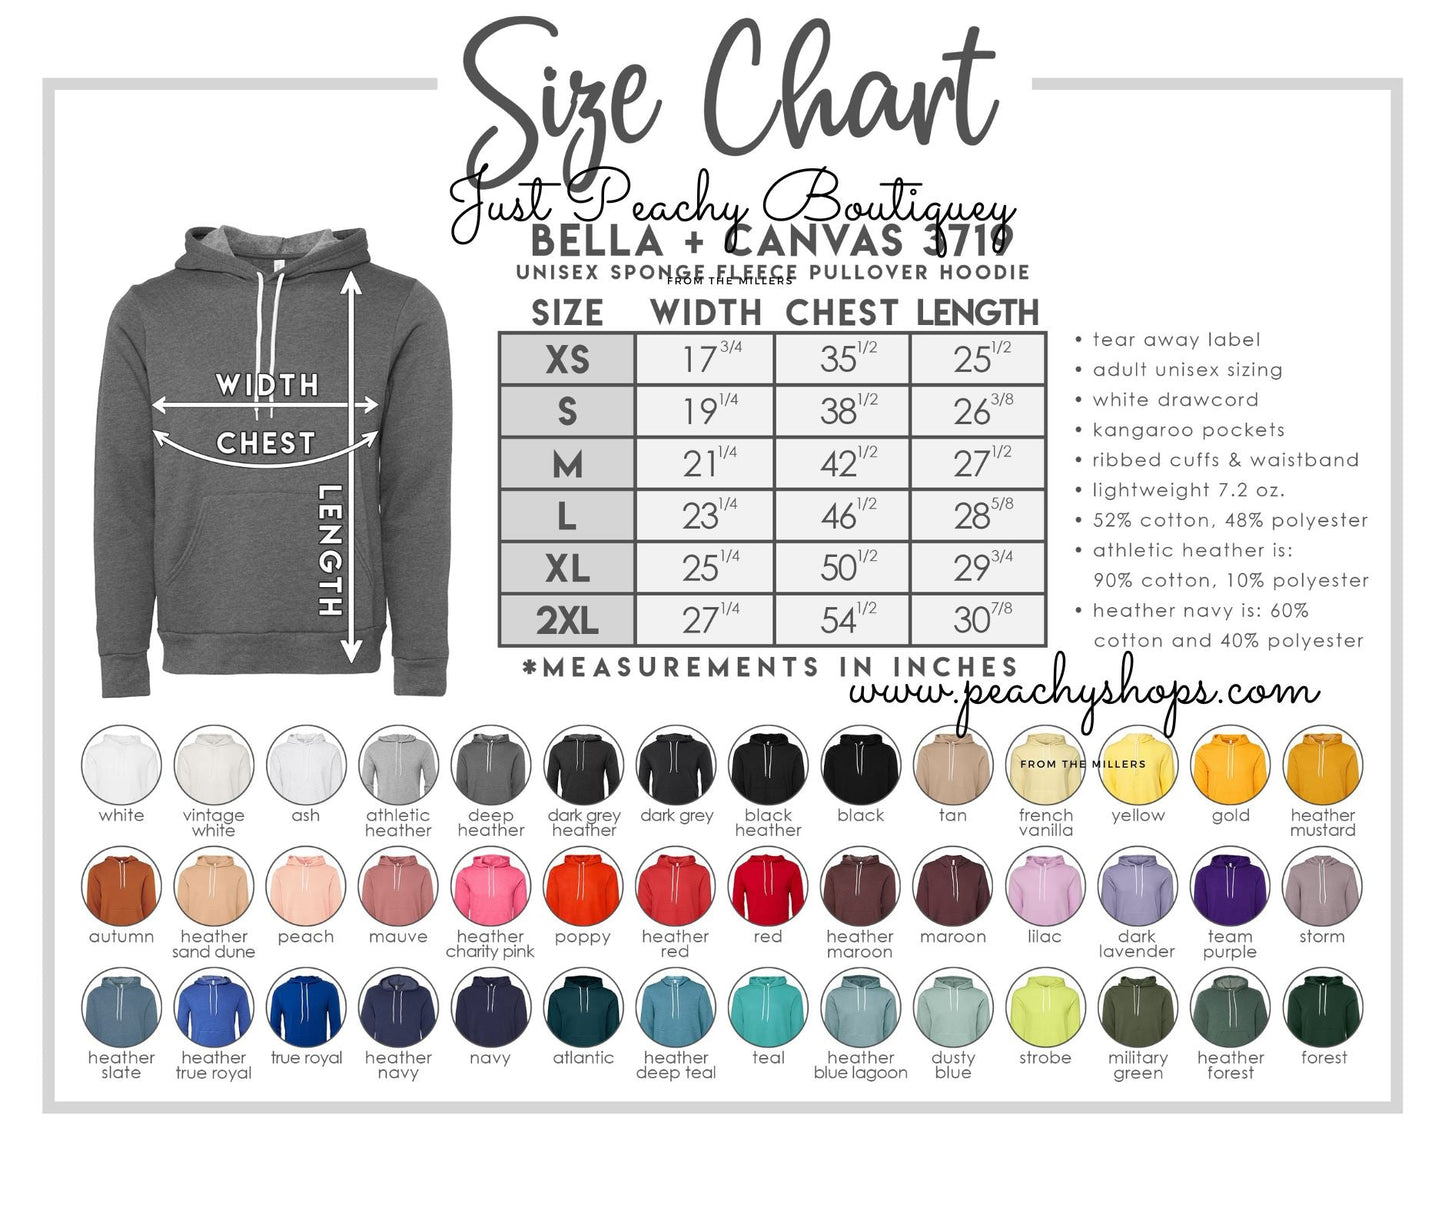 I DRINK BECAUSE I SKOL - PICK FROM 200 COLOR & STYLE OPTIONS! - TAT 4-7 DAYS